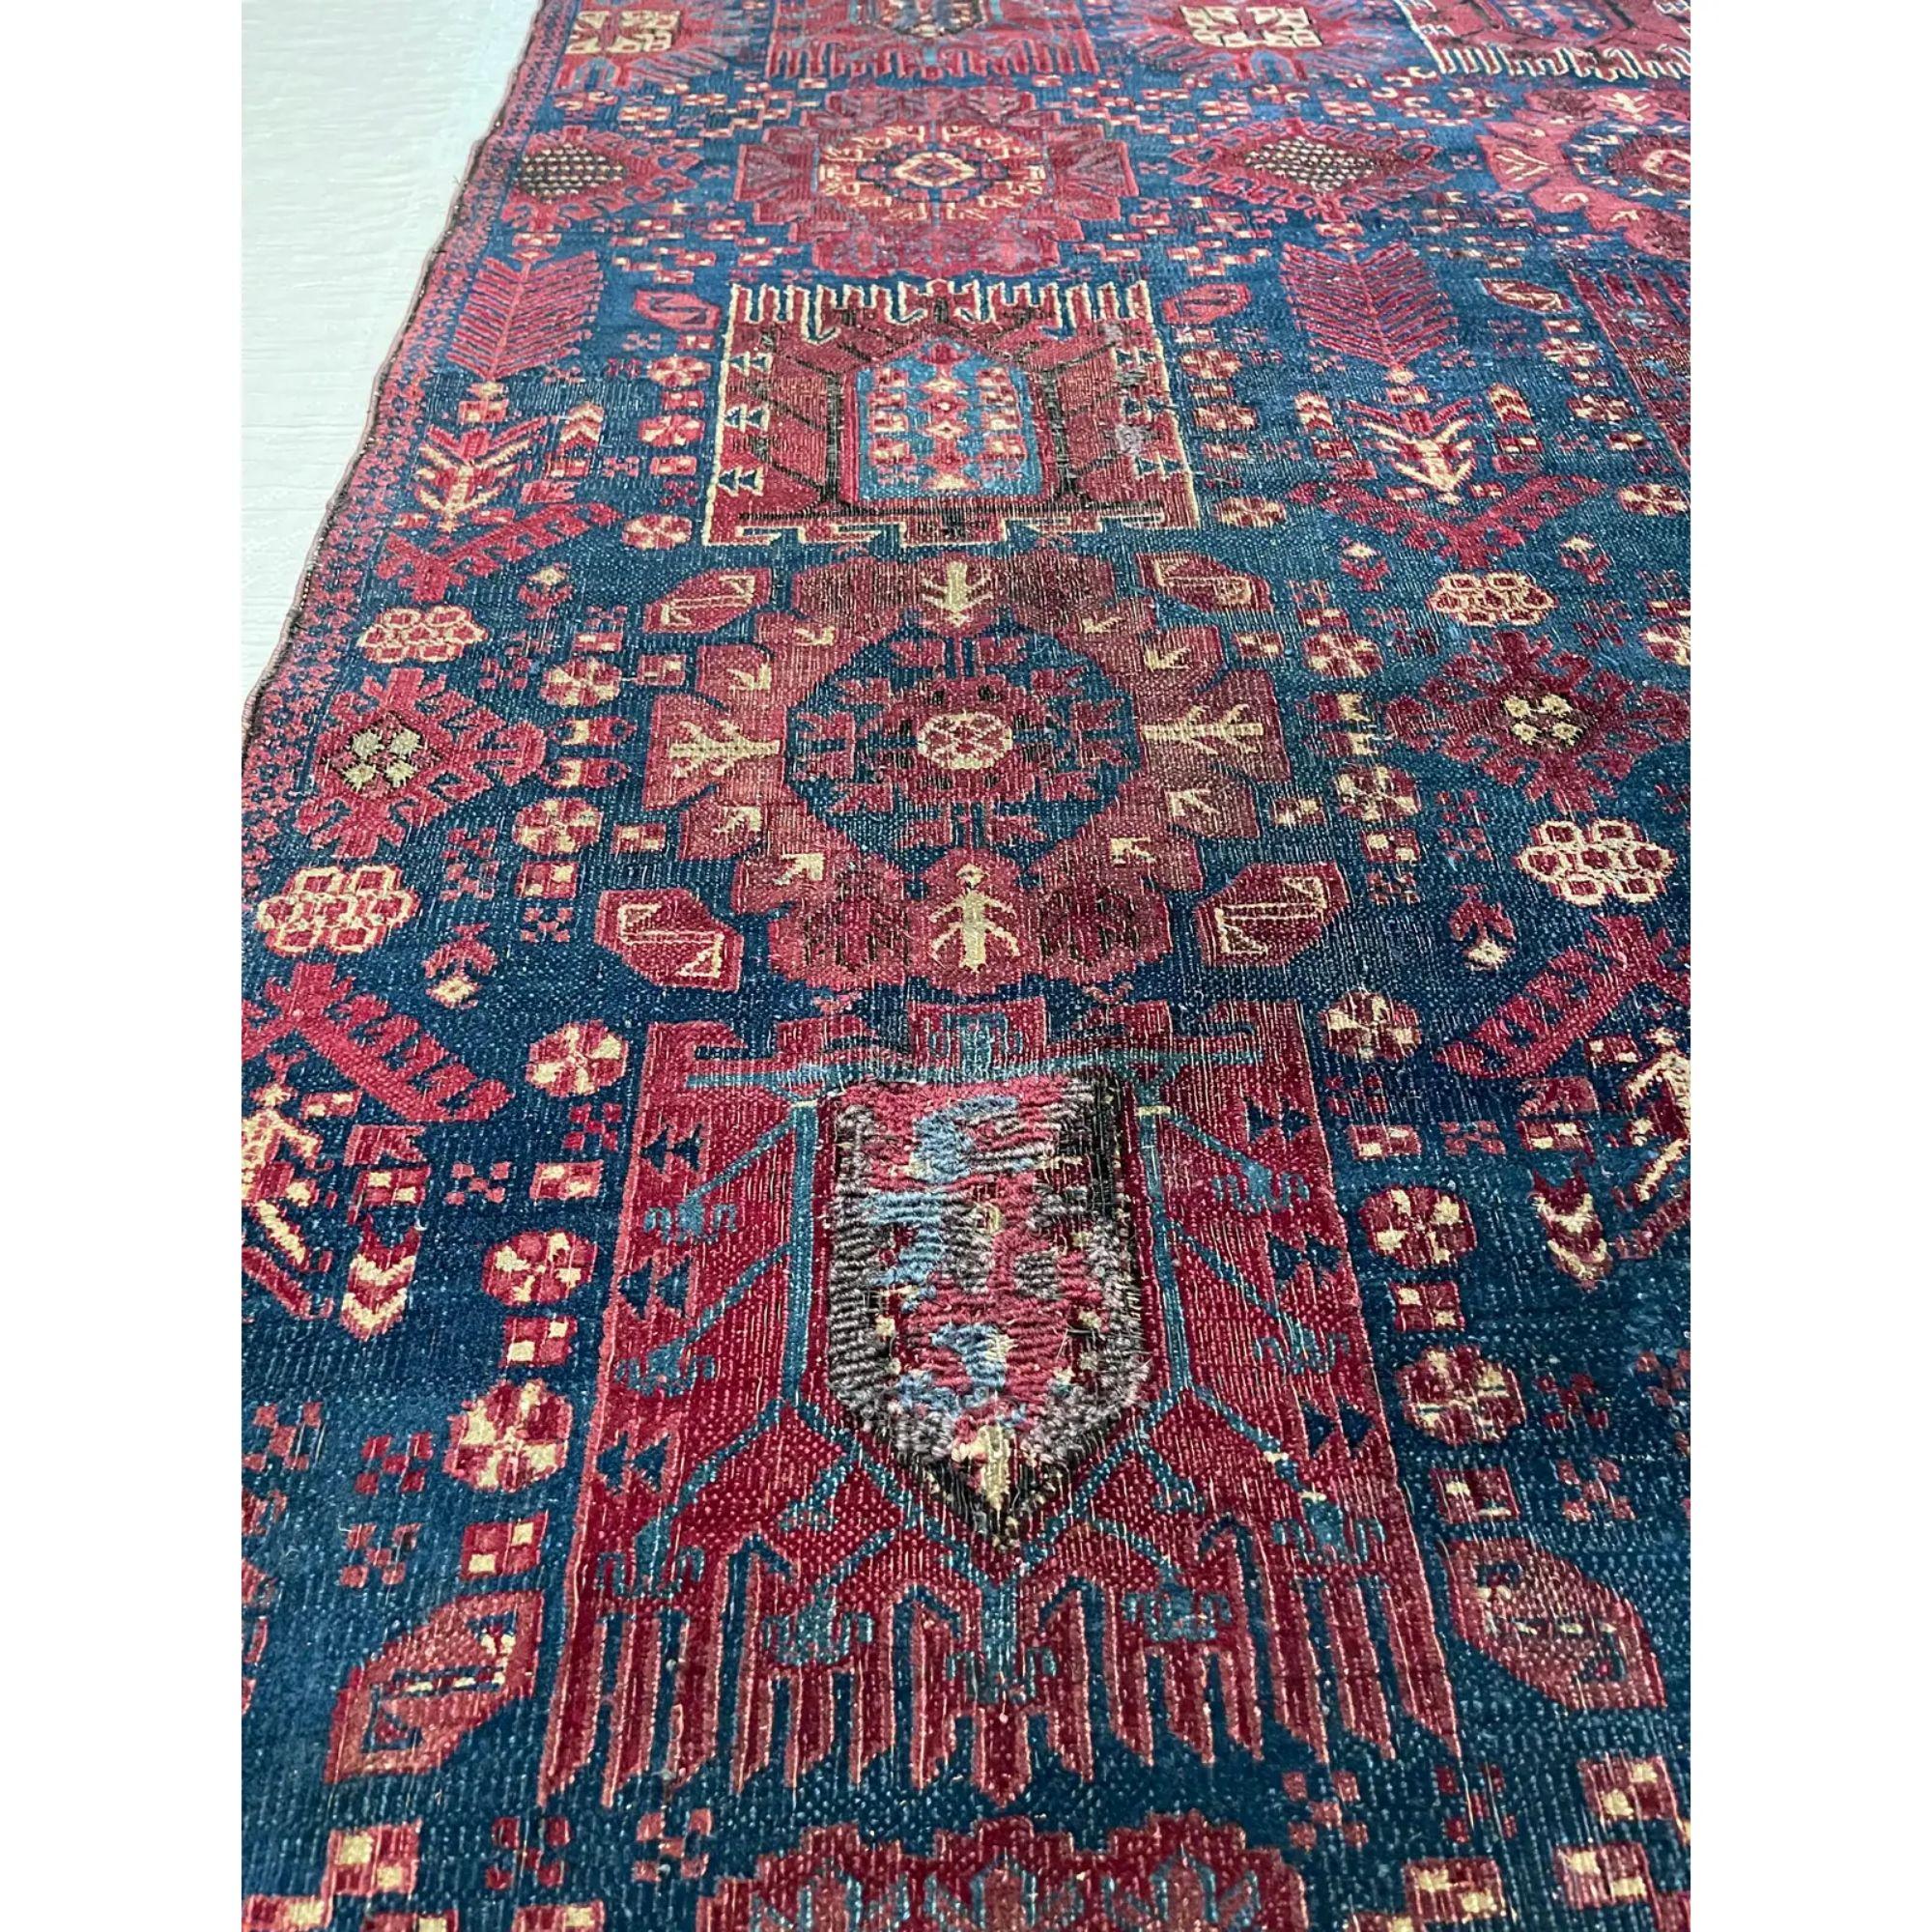 Spanish Colonial Antique Spanish Geometric Rug 4'x4' For Sale